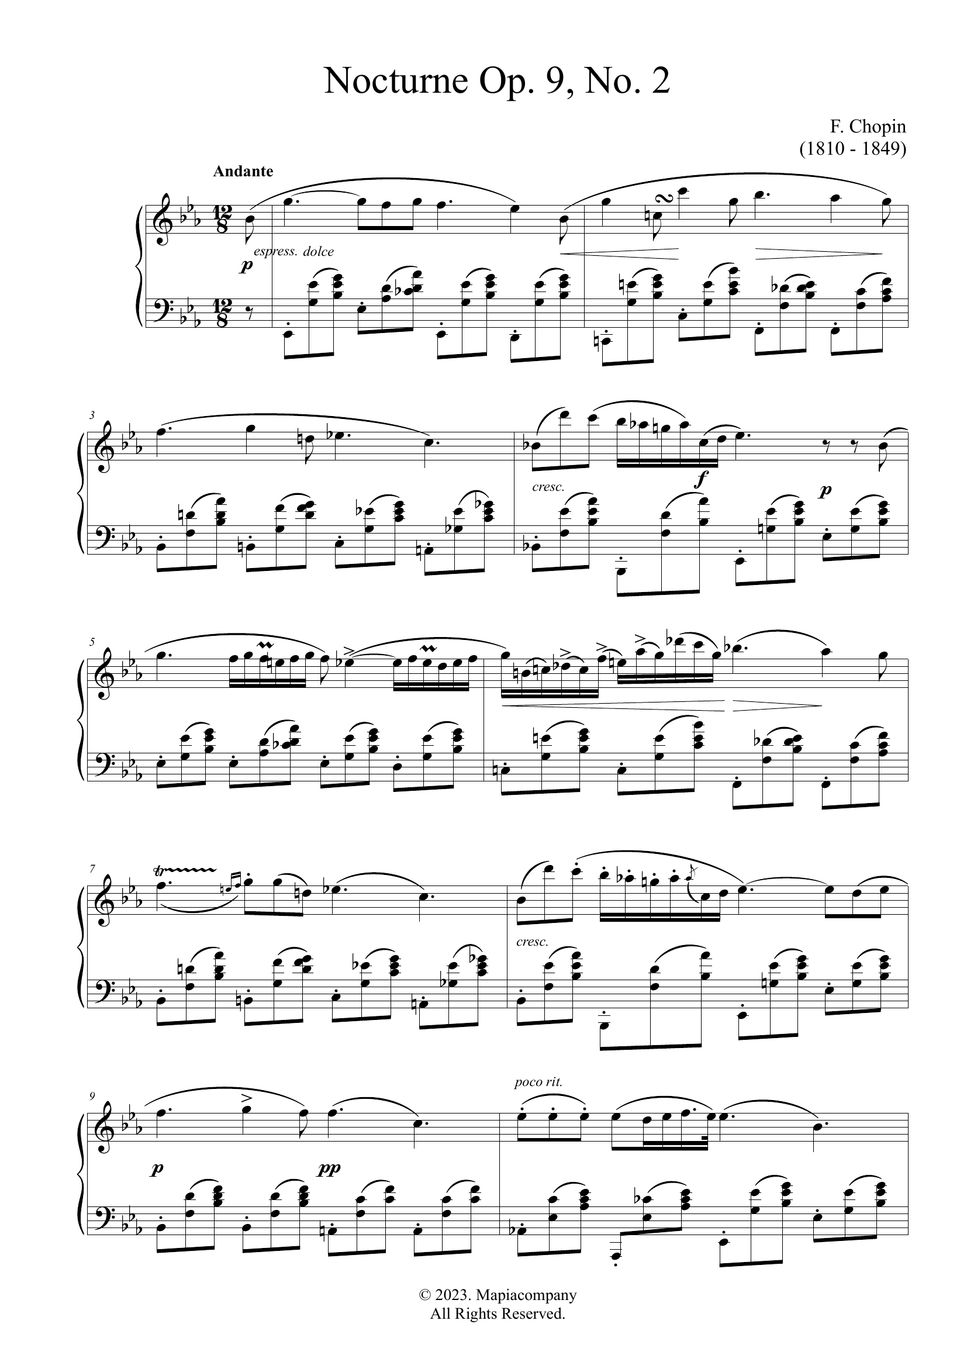 F. Chopin - - Nocturne Op.9 No.2 piano sheet free Hoja by MyMusicSheet Official